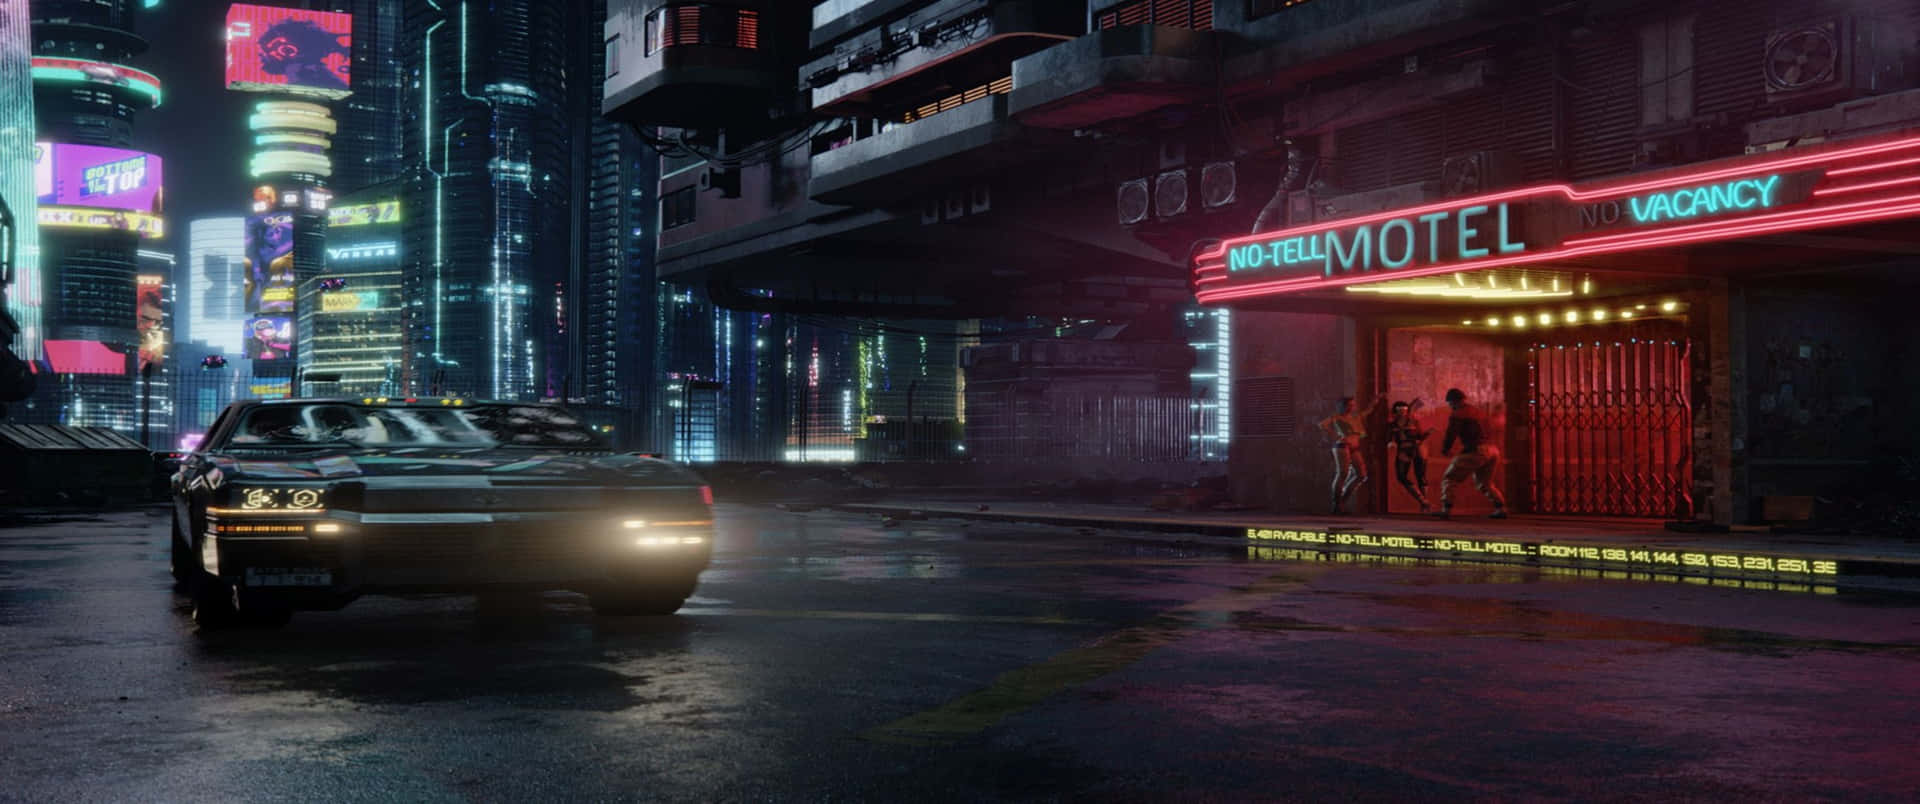 3440x1440p Cyberpunk 2077 Background Car Parked In Front Of Hotel